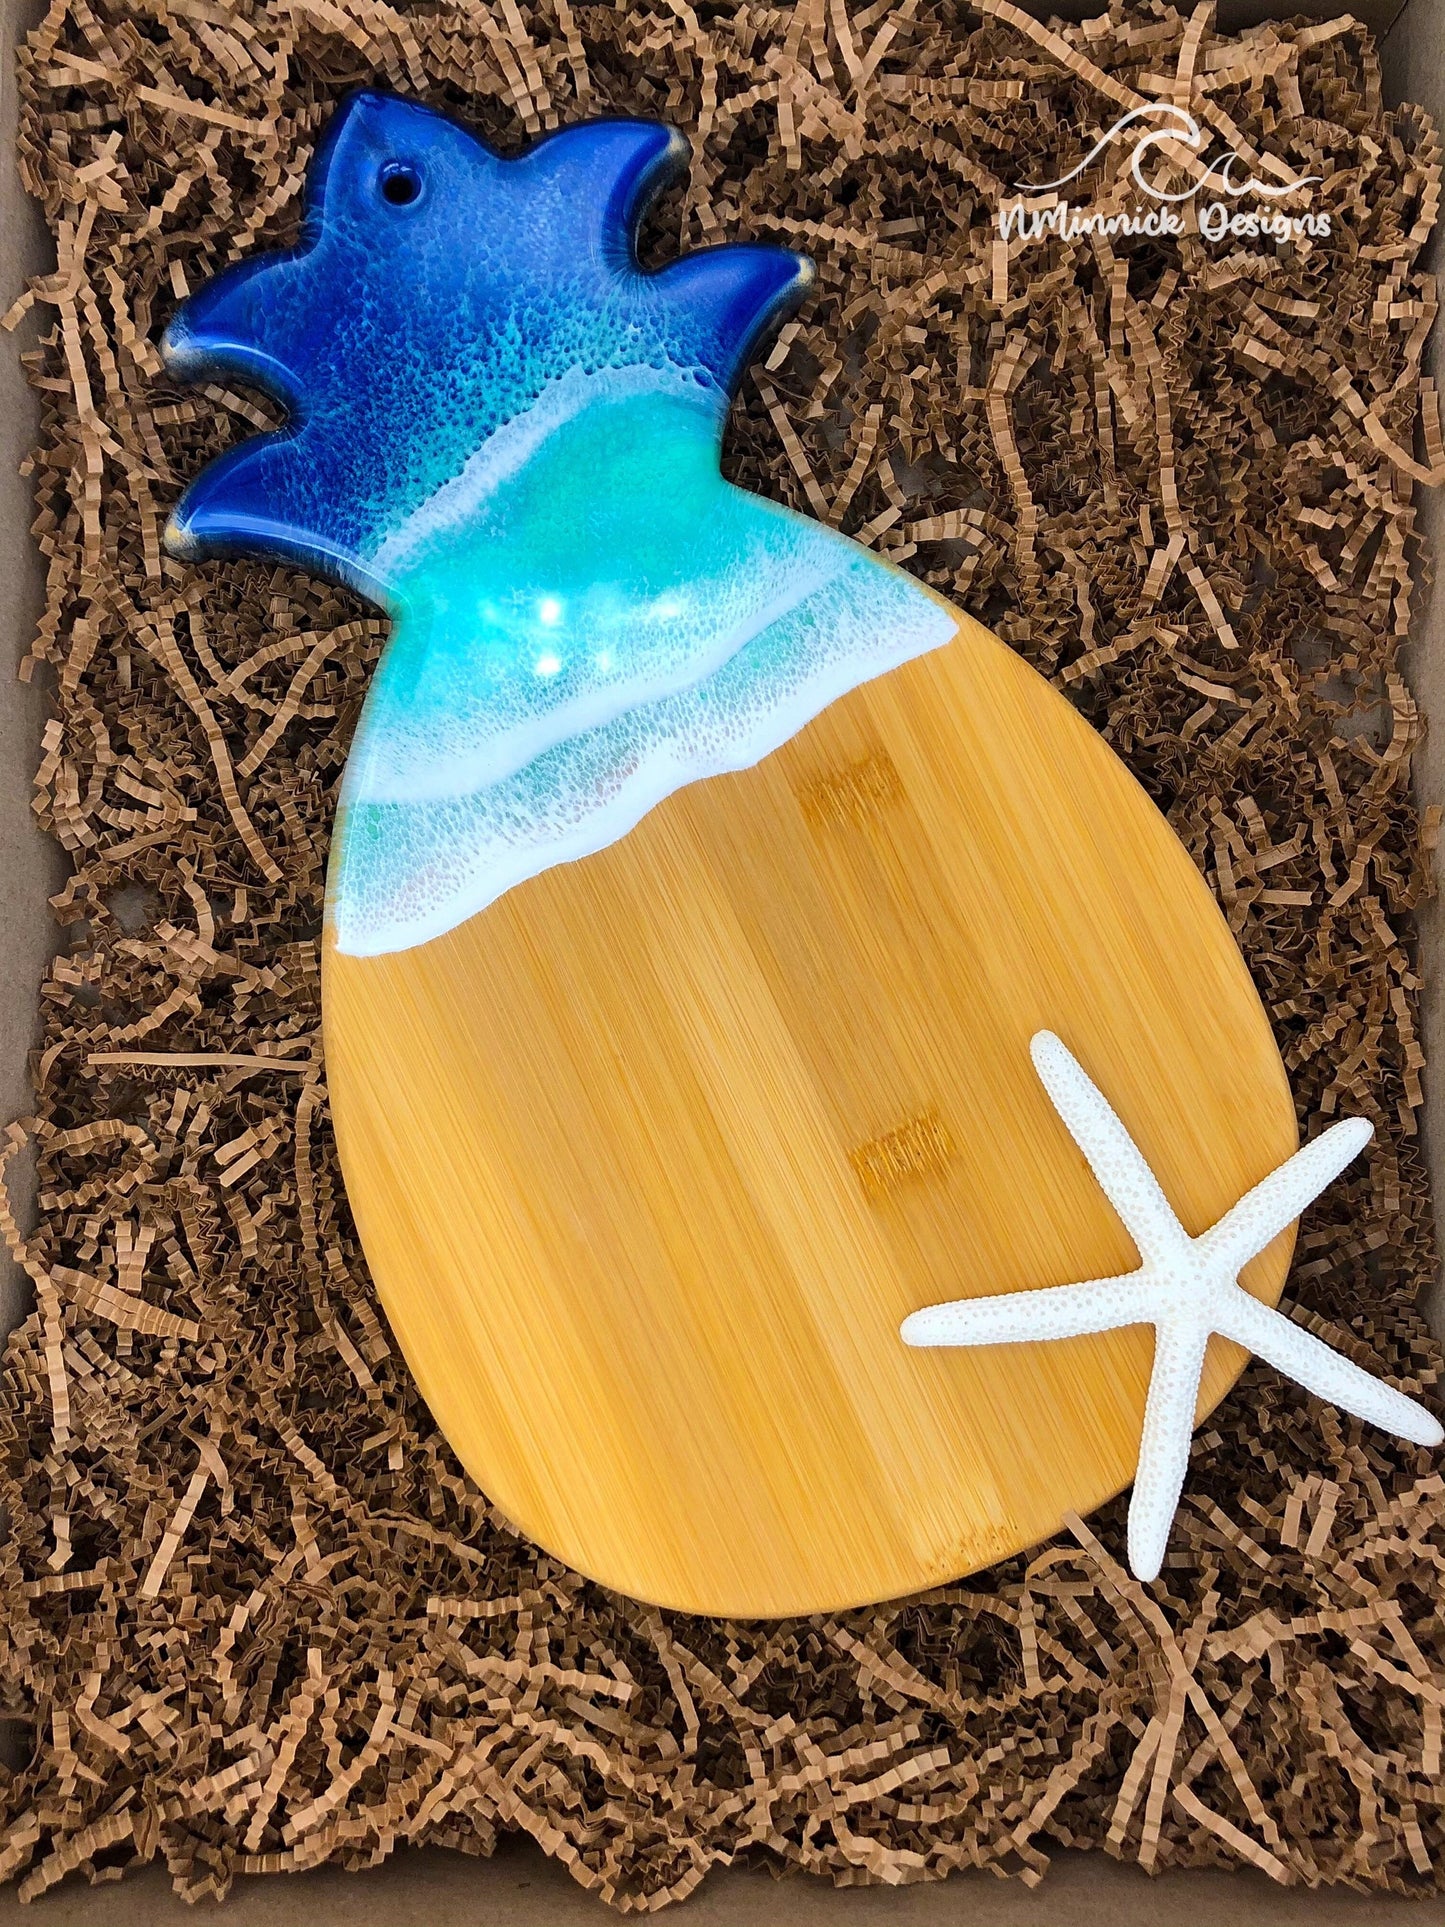 Pineapple shaped bamboo serving board with navy and chartreuse ocean resin art laying in kraft colored eco-friendly and plastic-free packaging next to a natural starfish (not included).